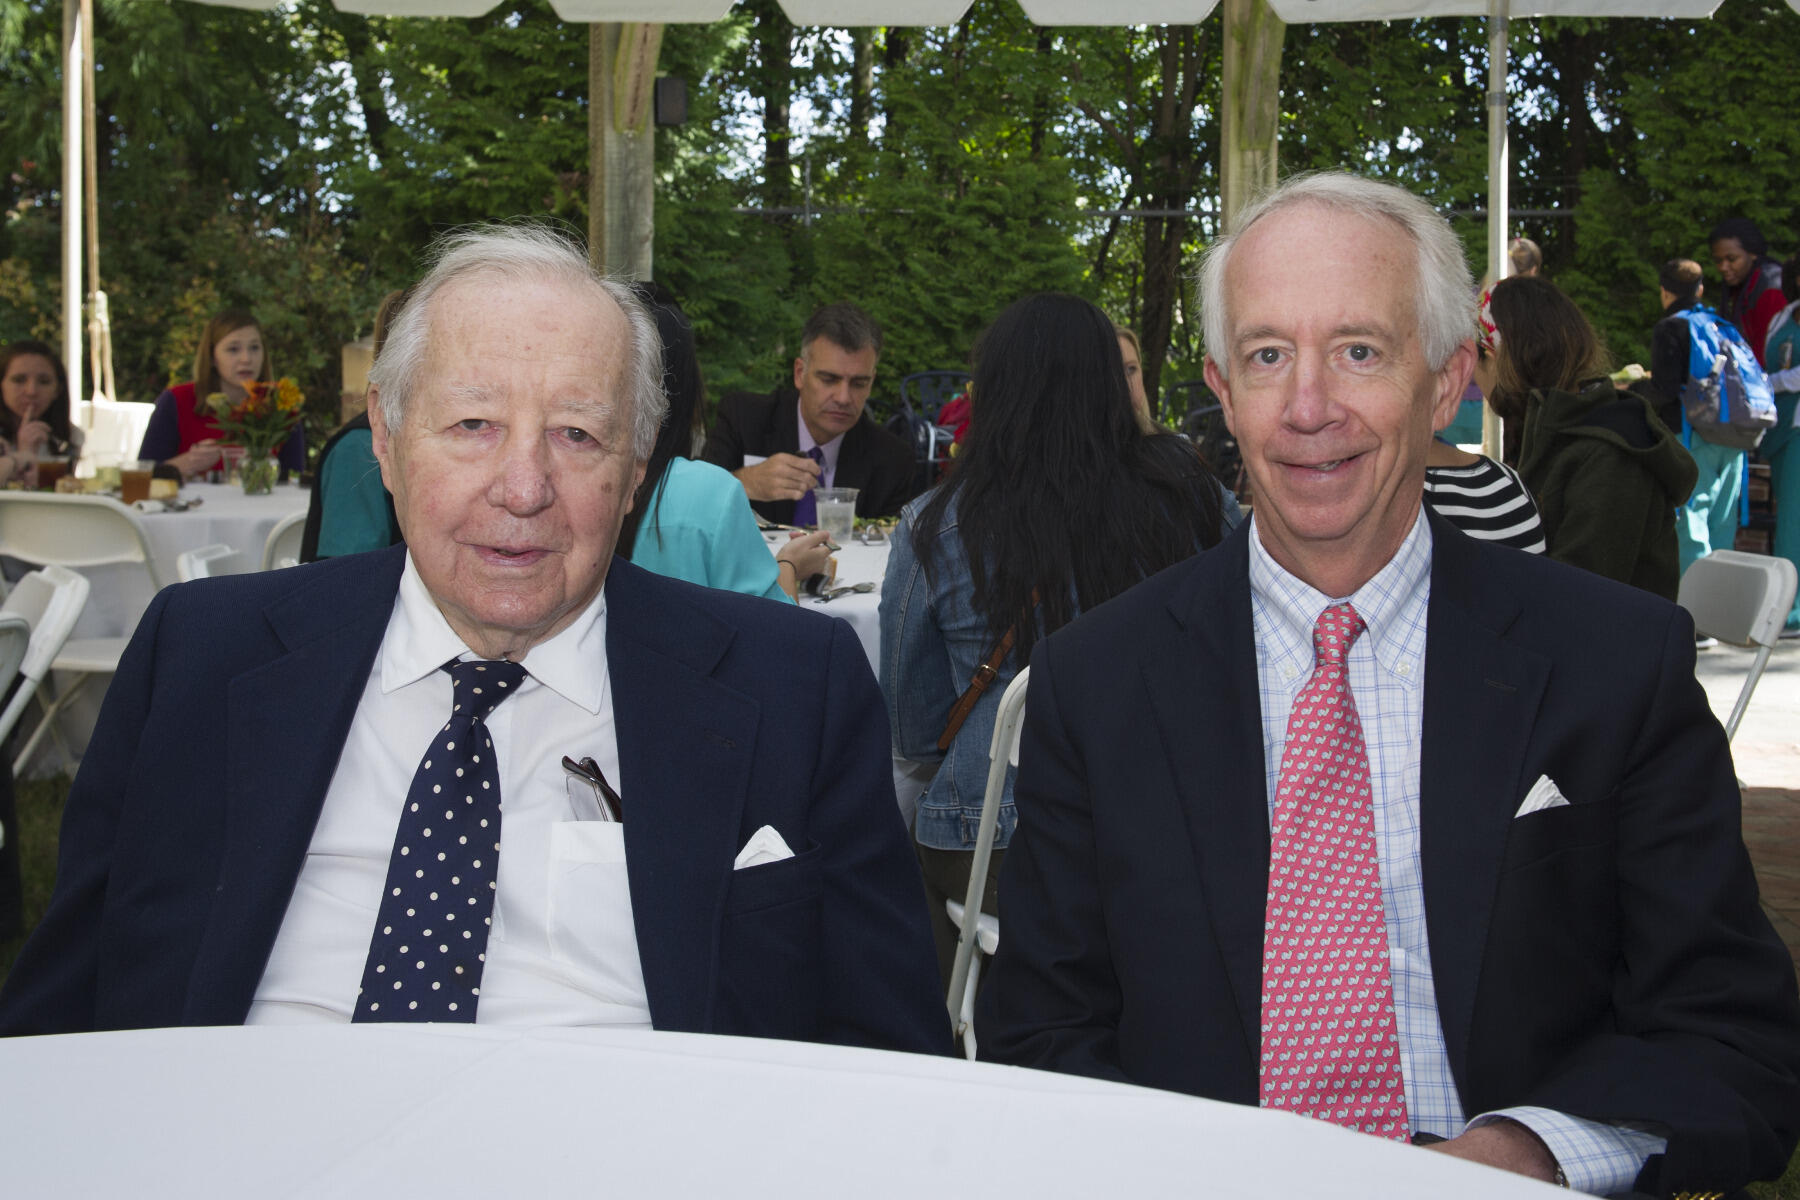 Hobie Claiborne, M.D., and Herbert Claiborne, III, trustees of the Lettie Pate Whitehead Foundation.